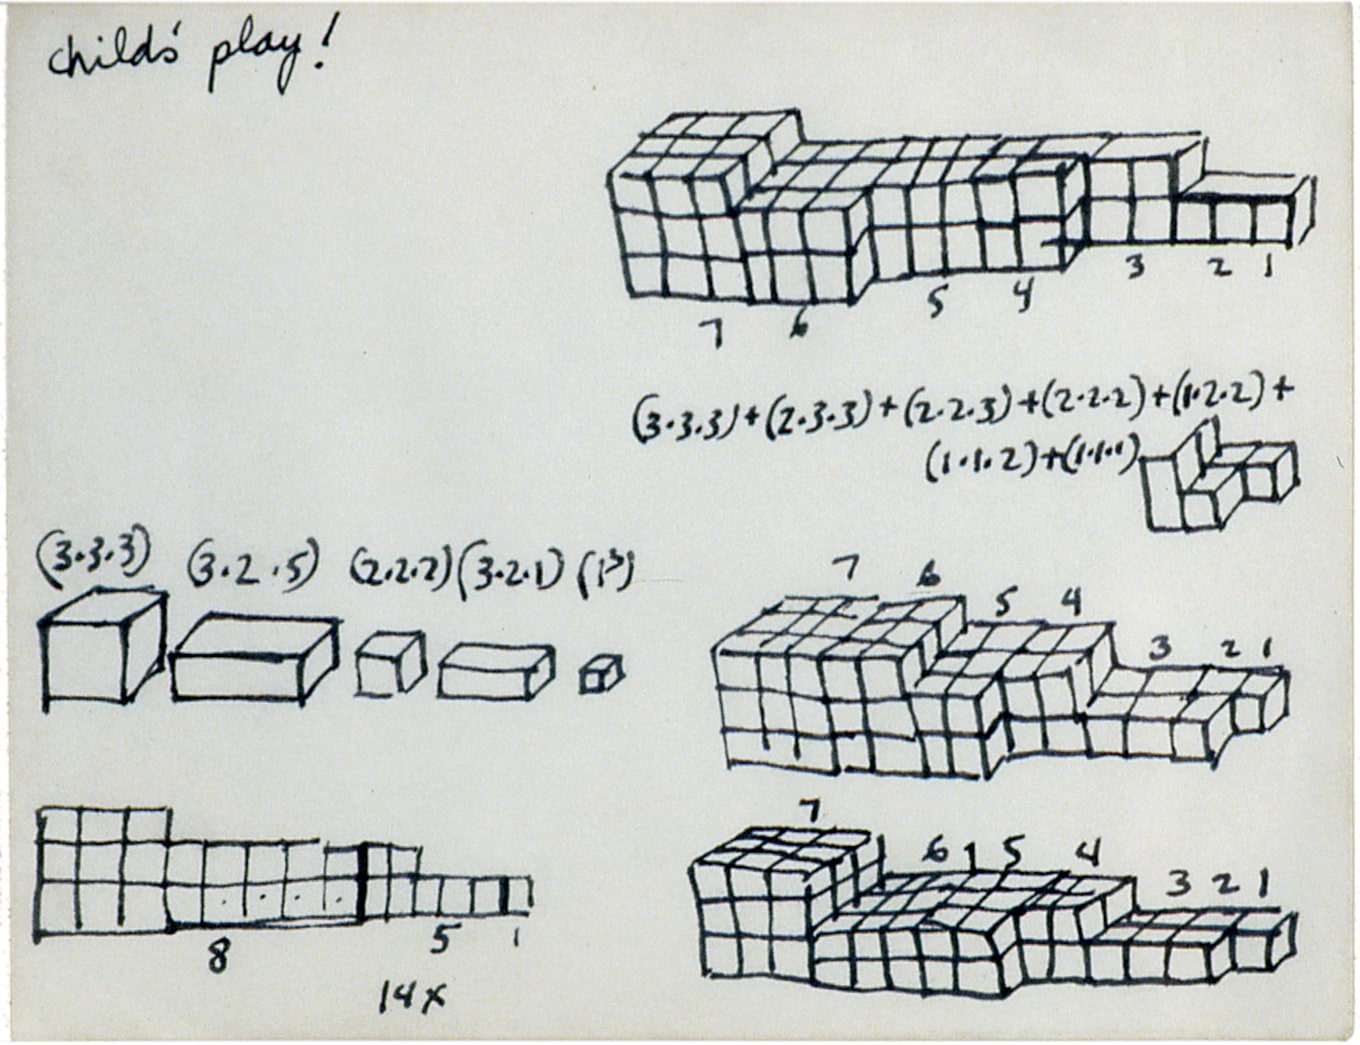 Mel Bochner,&nbsp;Untitled (&quot;Child&#039;s Play!&quot;: Study for 7-Part Progression), 1966. Ink on paper, 5 2/3 x 7 inches.